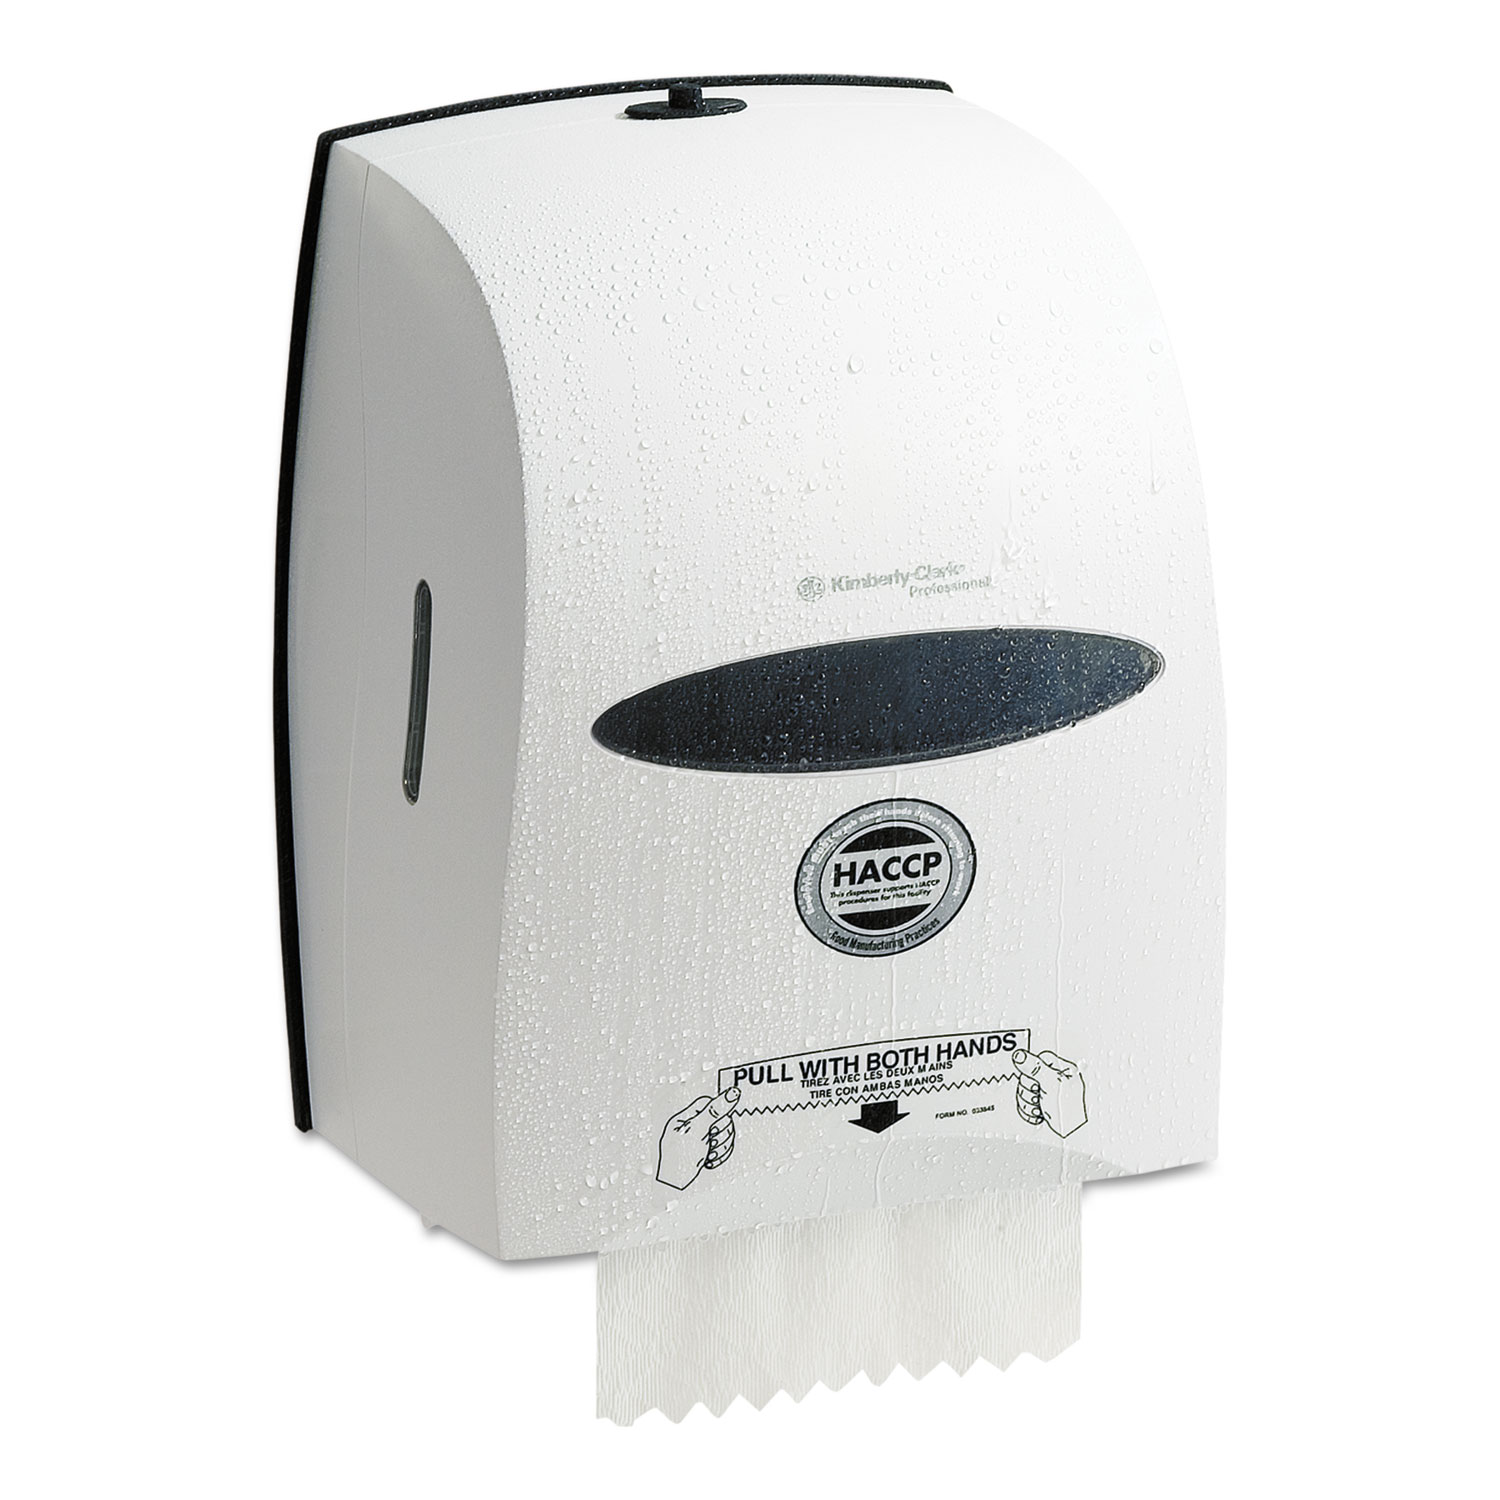 Sanitouch Hard Roll Towel Dispenser, 12 63/100w x 10 1/5d x 16 13/100h, White